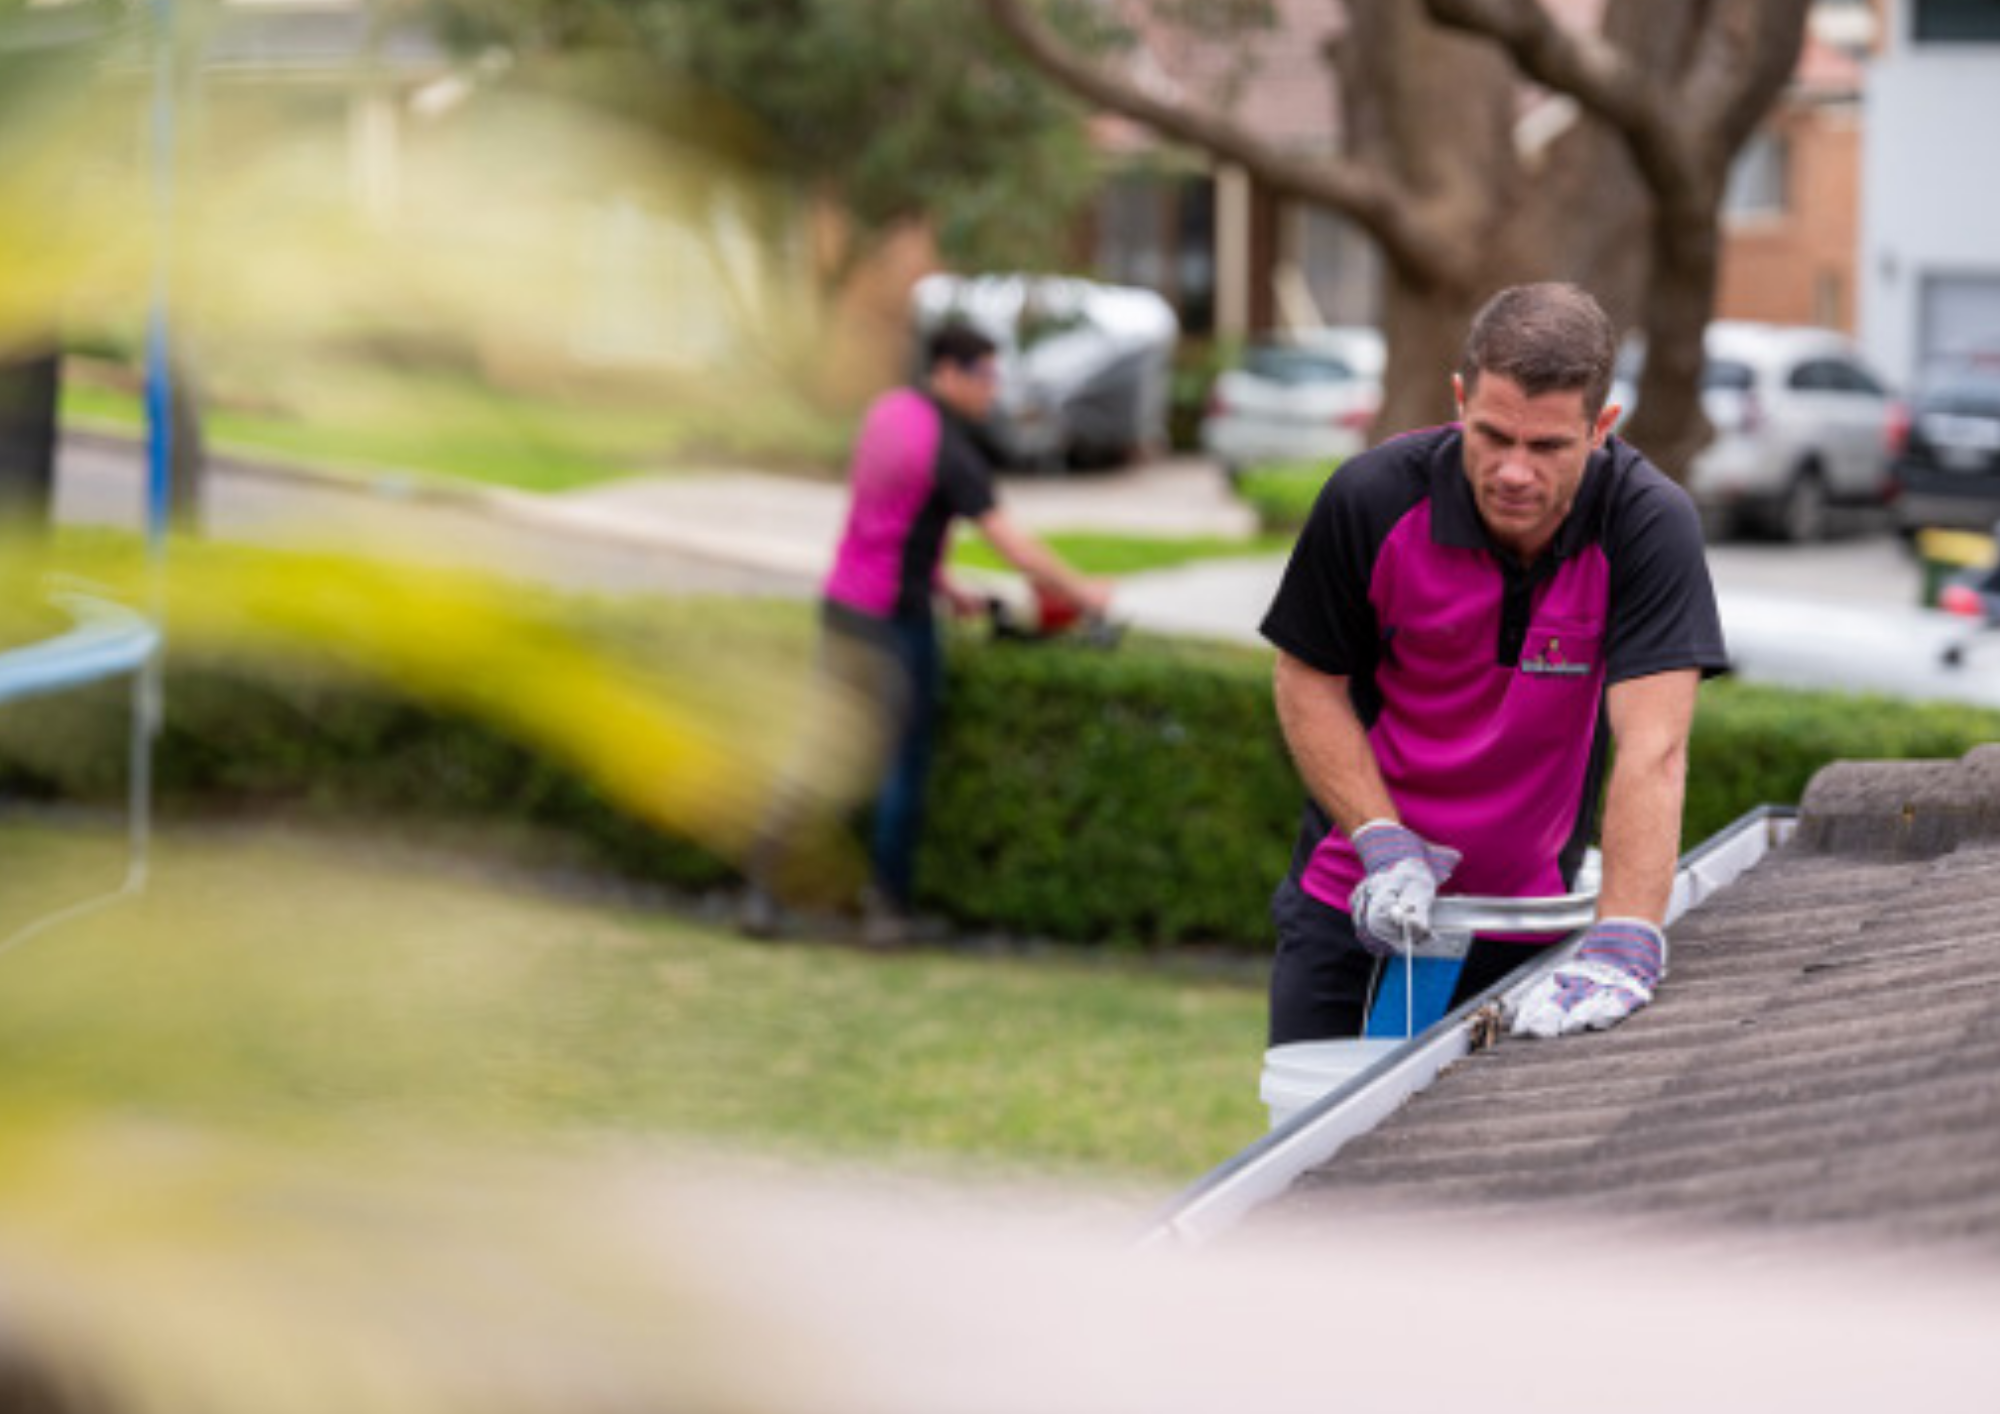 Landscaping & Gutter cleaning - Get some Street appeal with Hire A Hubby!